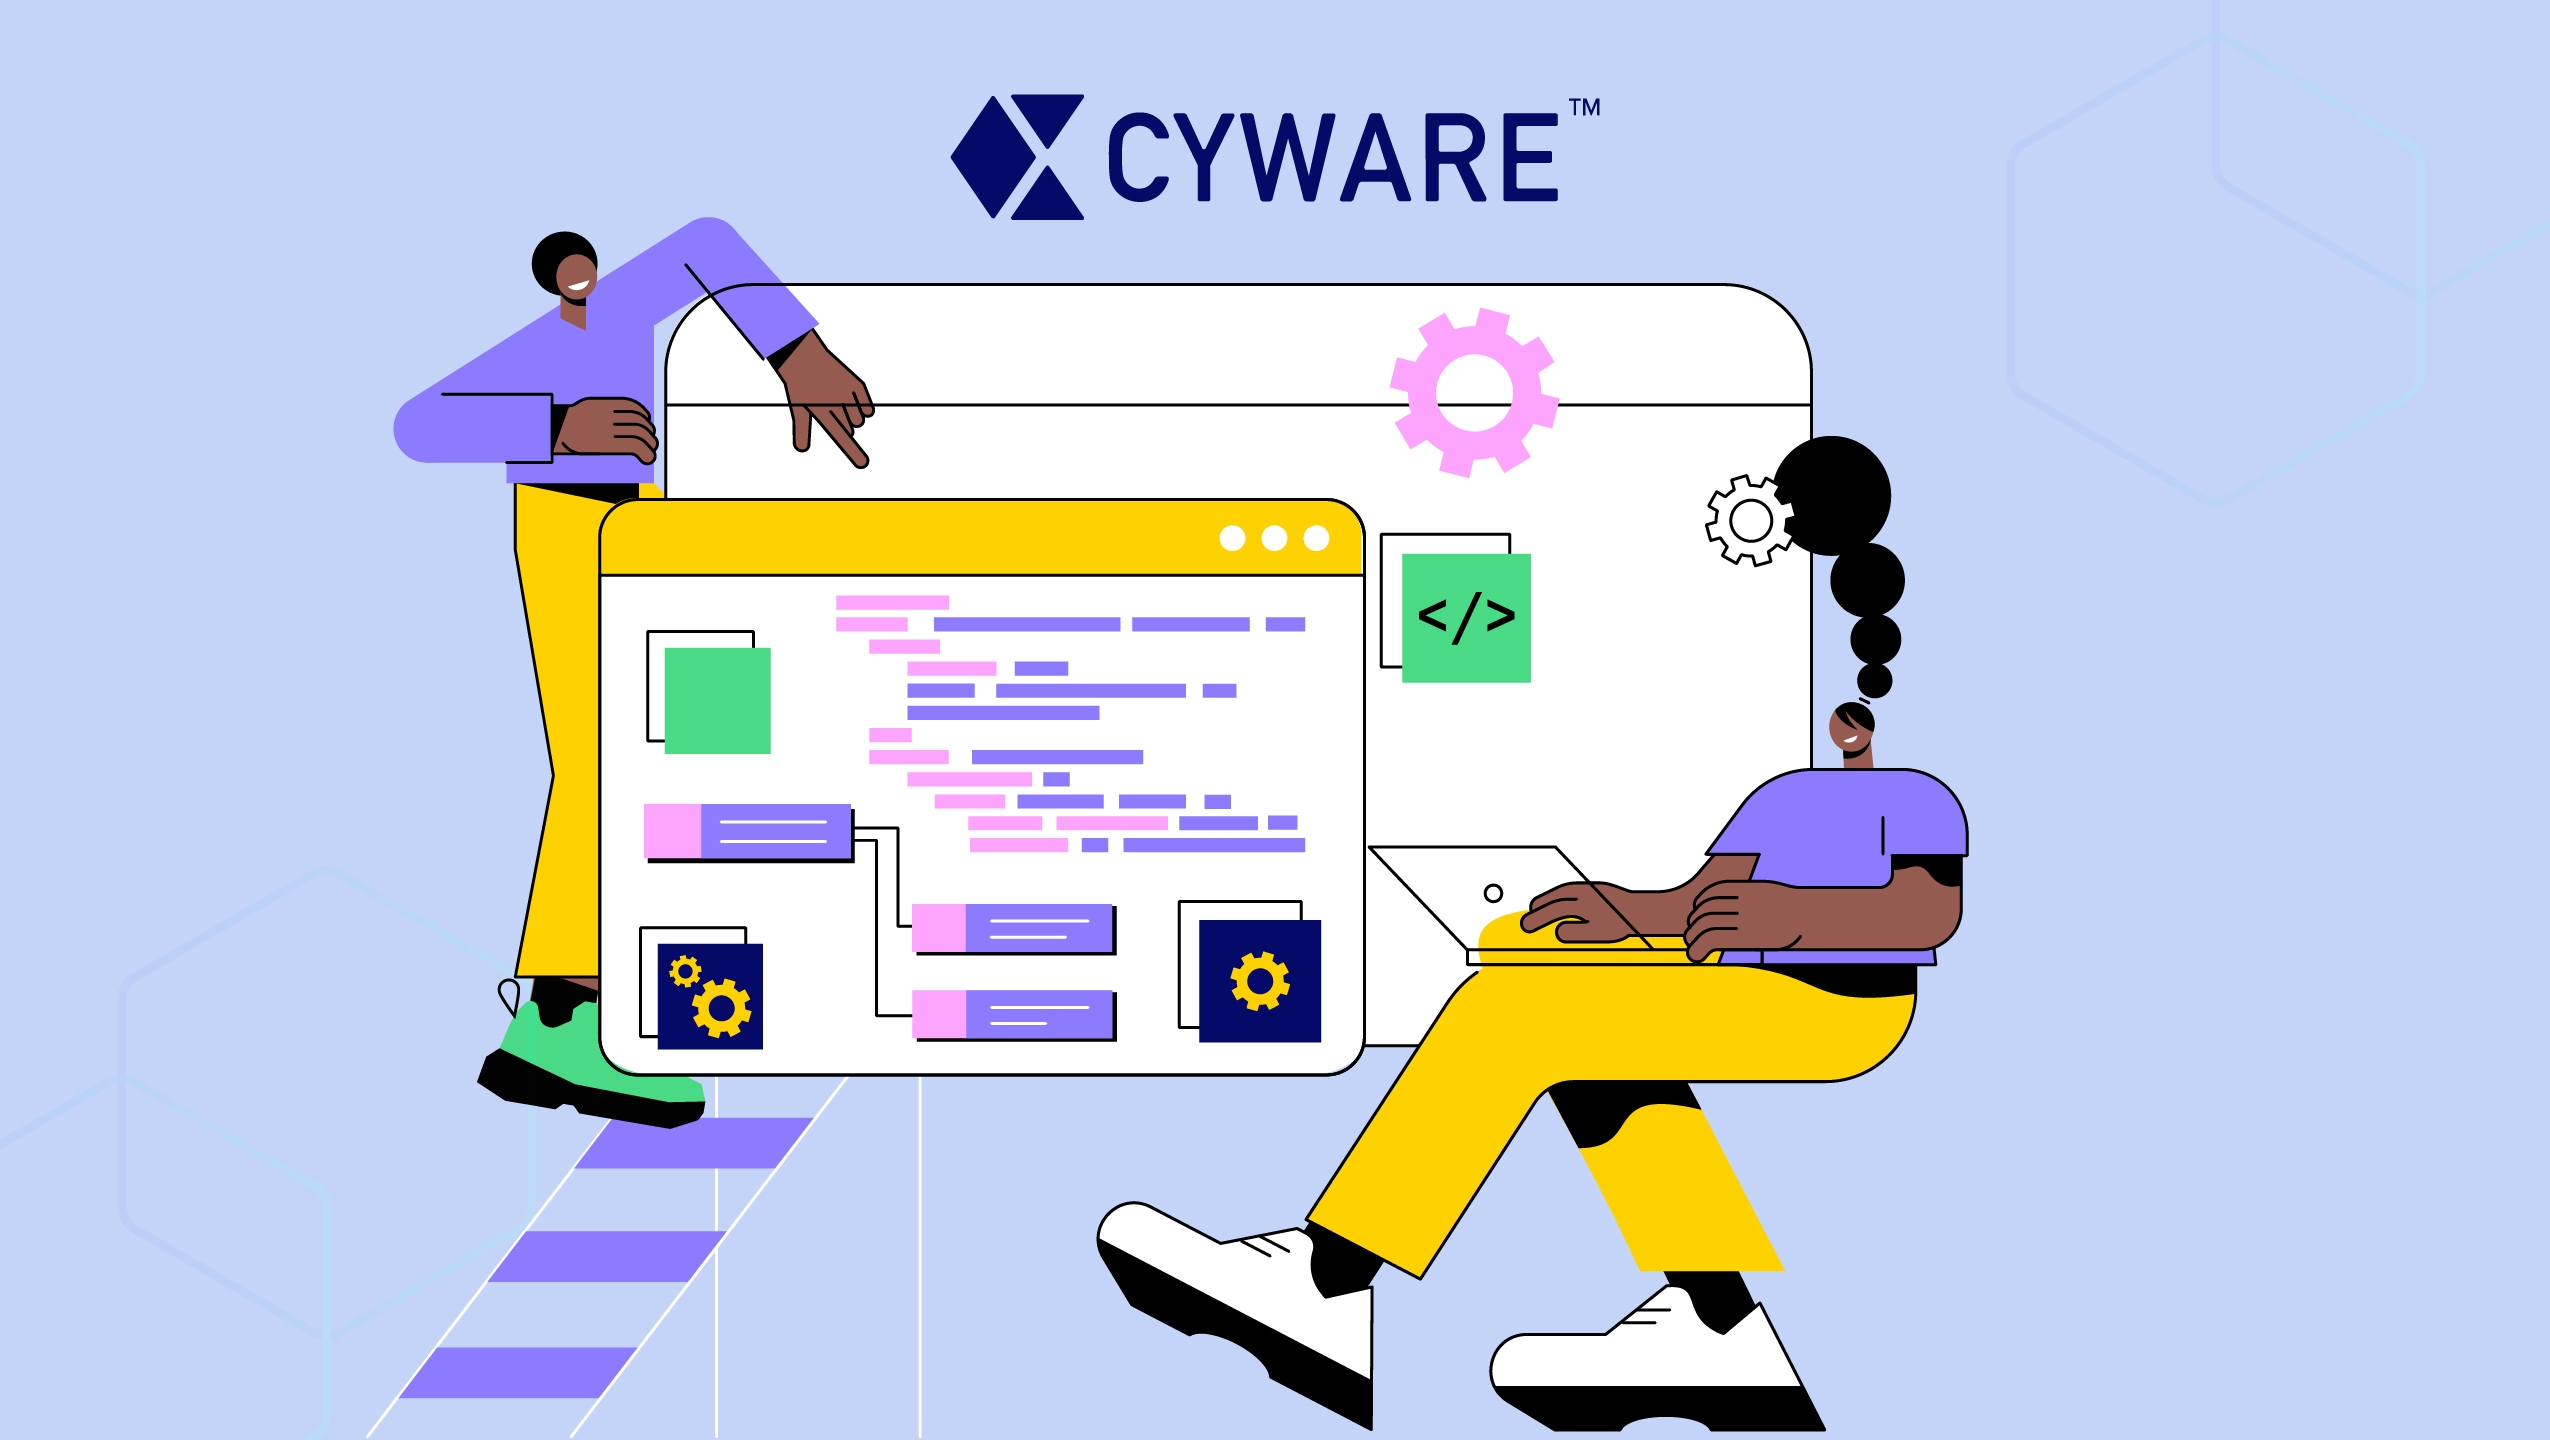 Build Custom Threat Response Case Management Workflows with Cyware